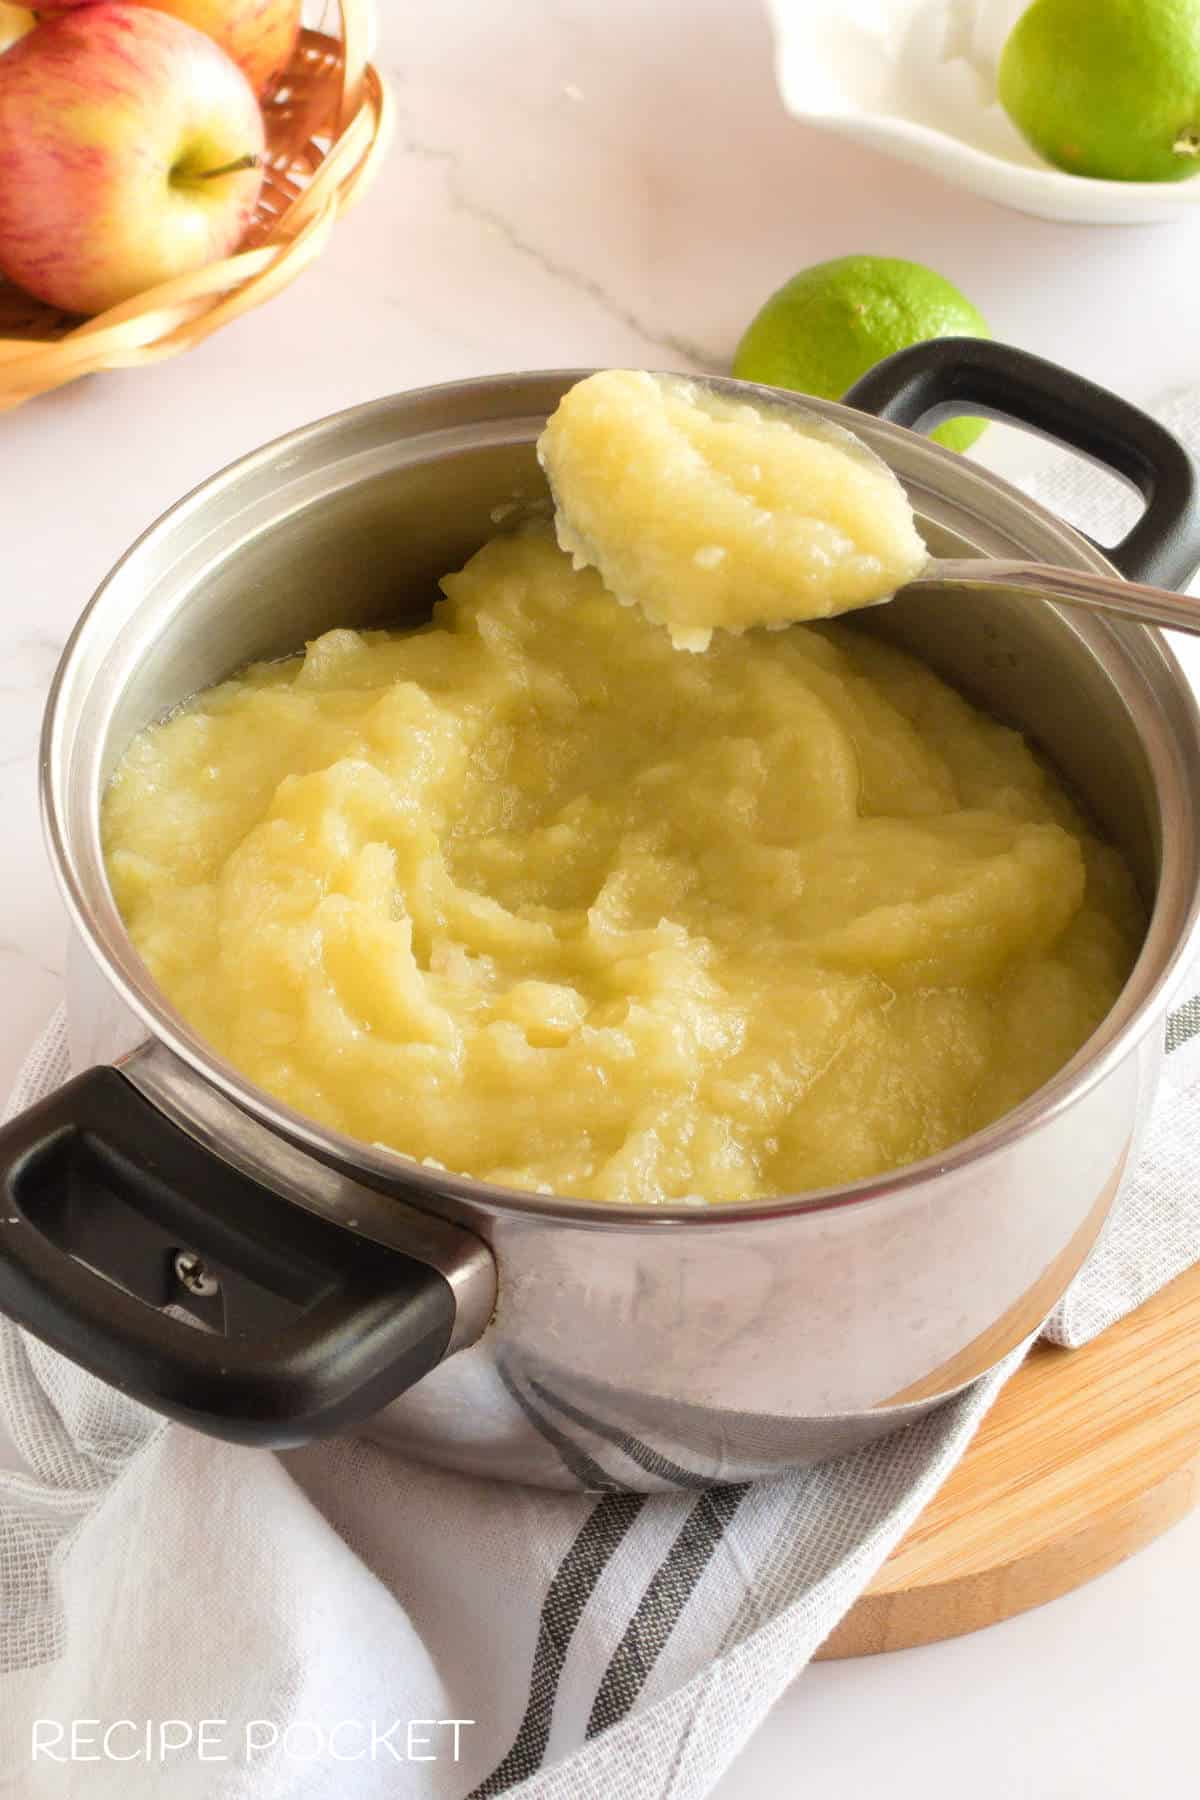 A pot of unsweetened apple sauce.